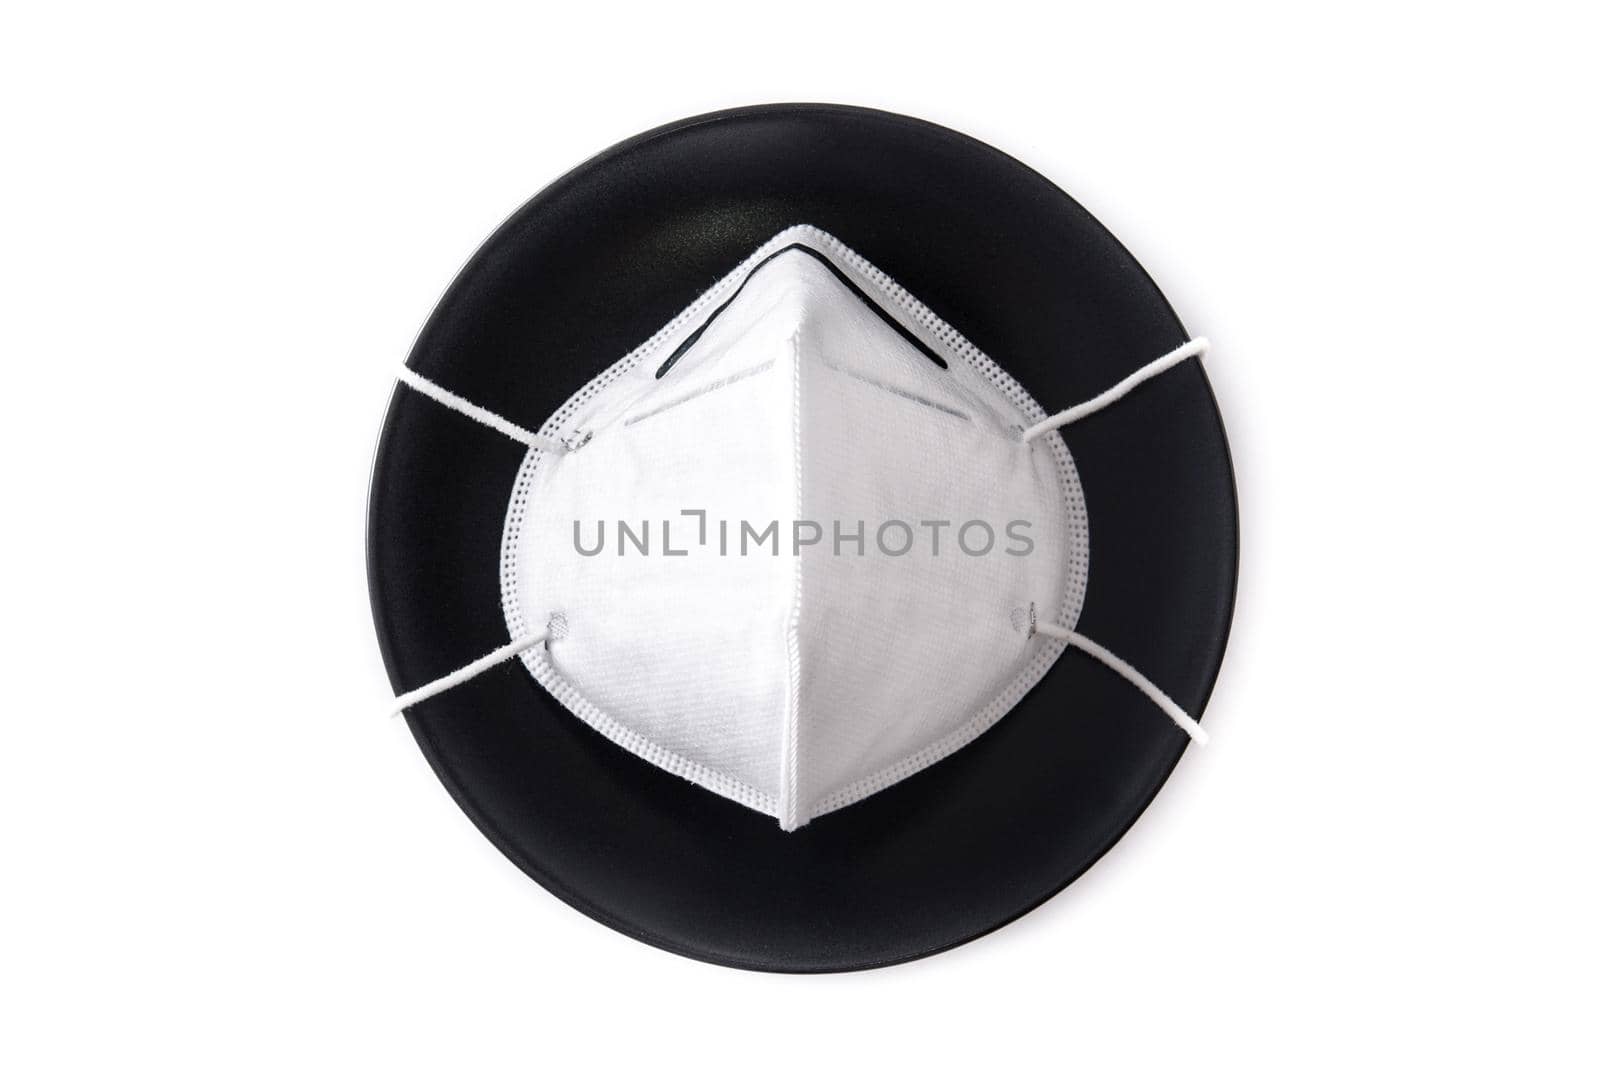 Protective face mask on a black plate by chandlervid85